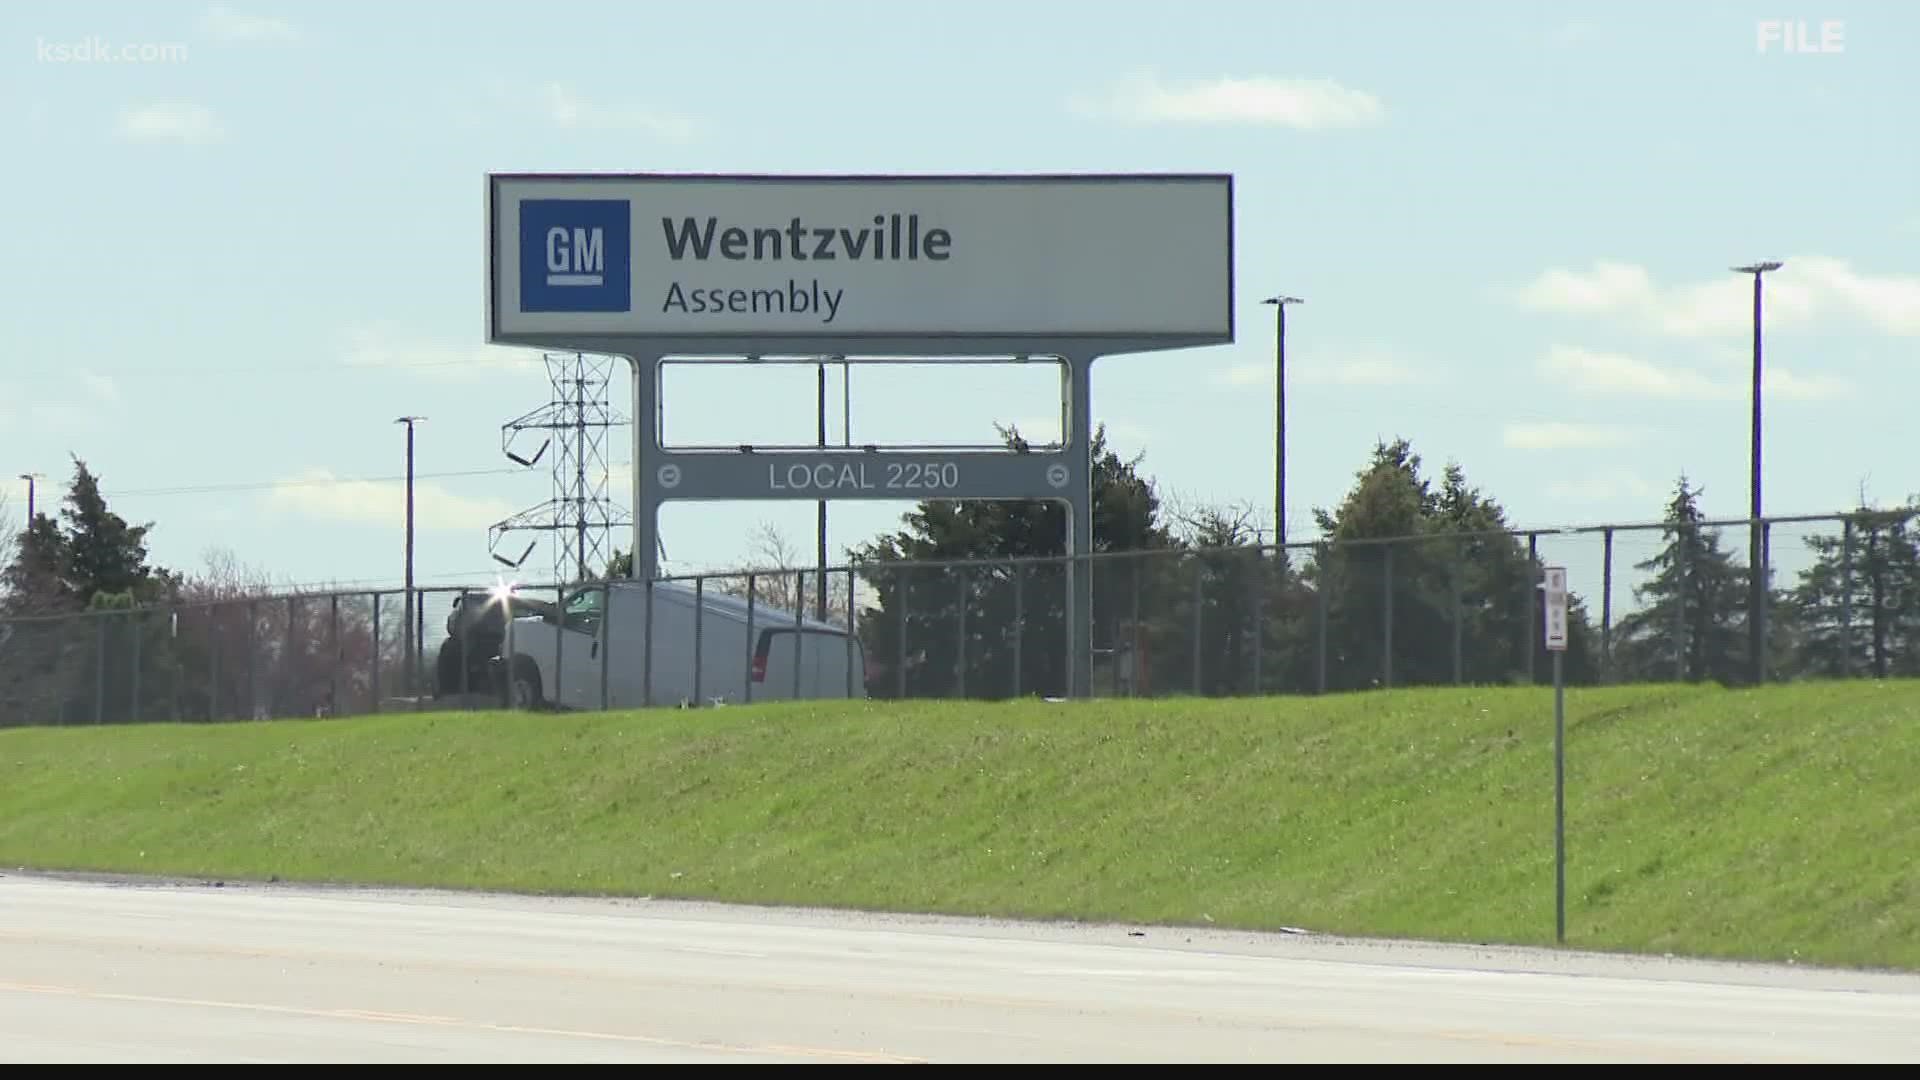 A two week shutdown begins at GM Wentzville plant on Monday due to semiconductor chip shortage